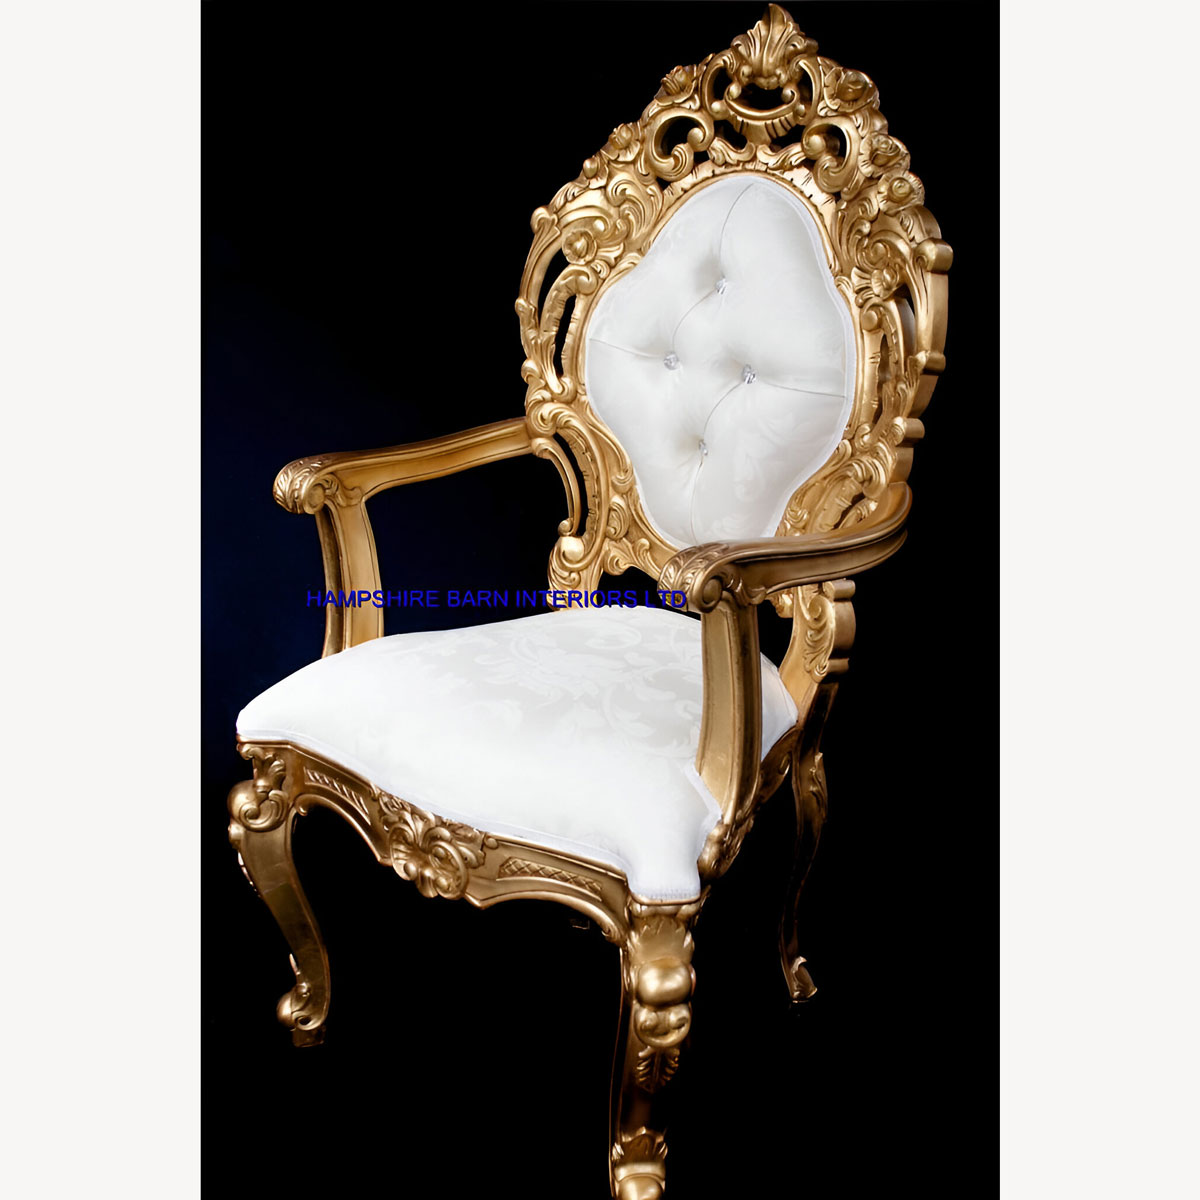 Ornate Royal Palace Throne Chair In Gold Leaf Frame And Ivory Cream Fabric 2 - Hampshire Barn Interiors - Ornate Royal Palace Throne Chair In Gold Leaf Frame And Ivory Cream Fabric -